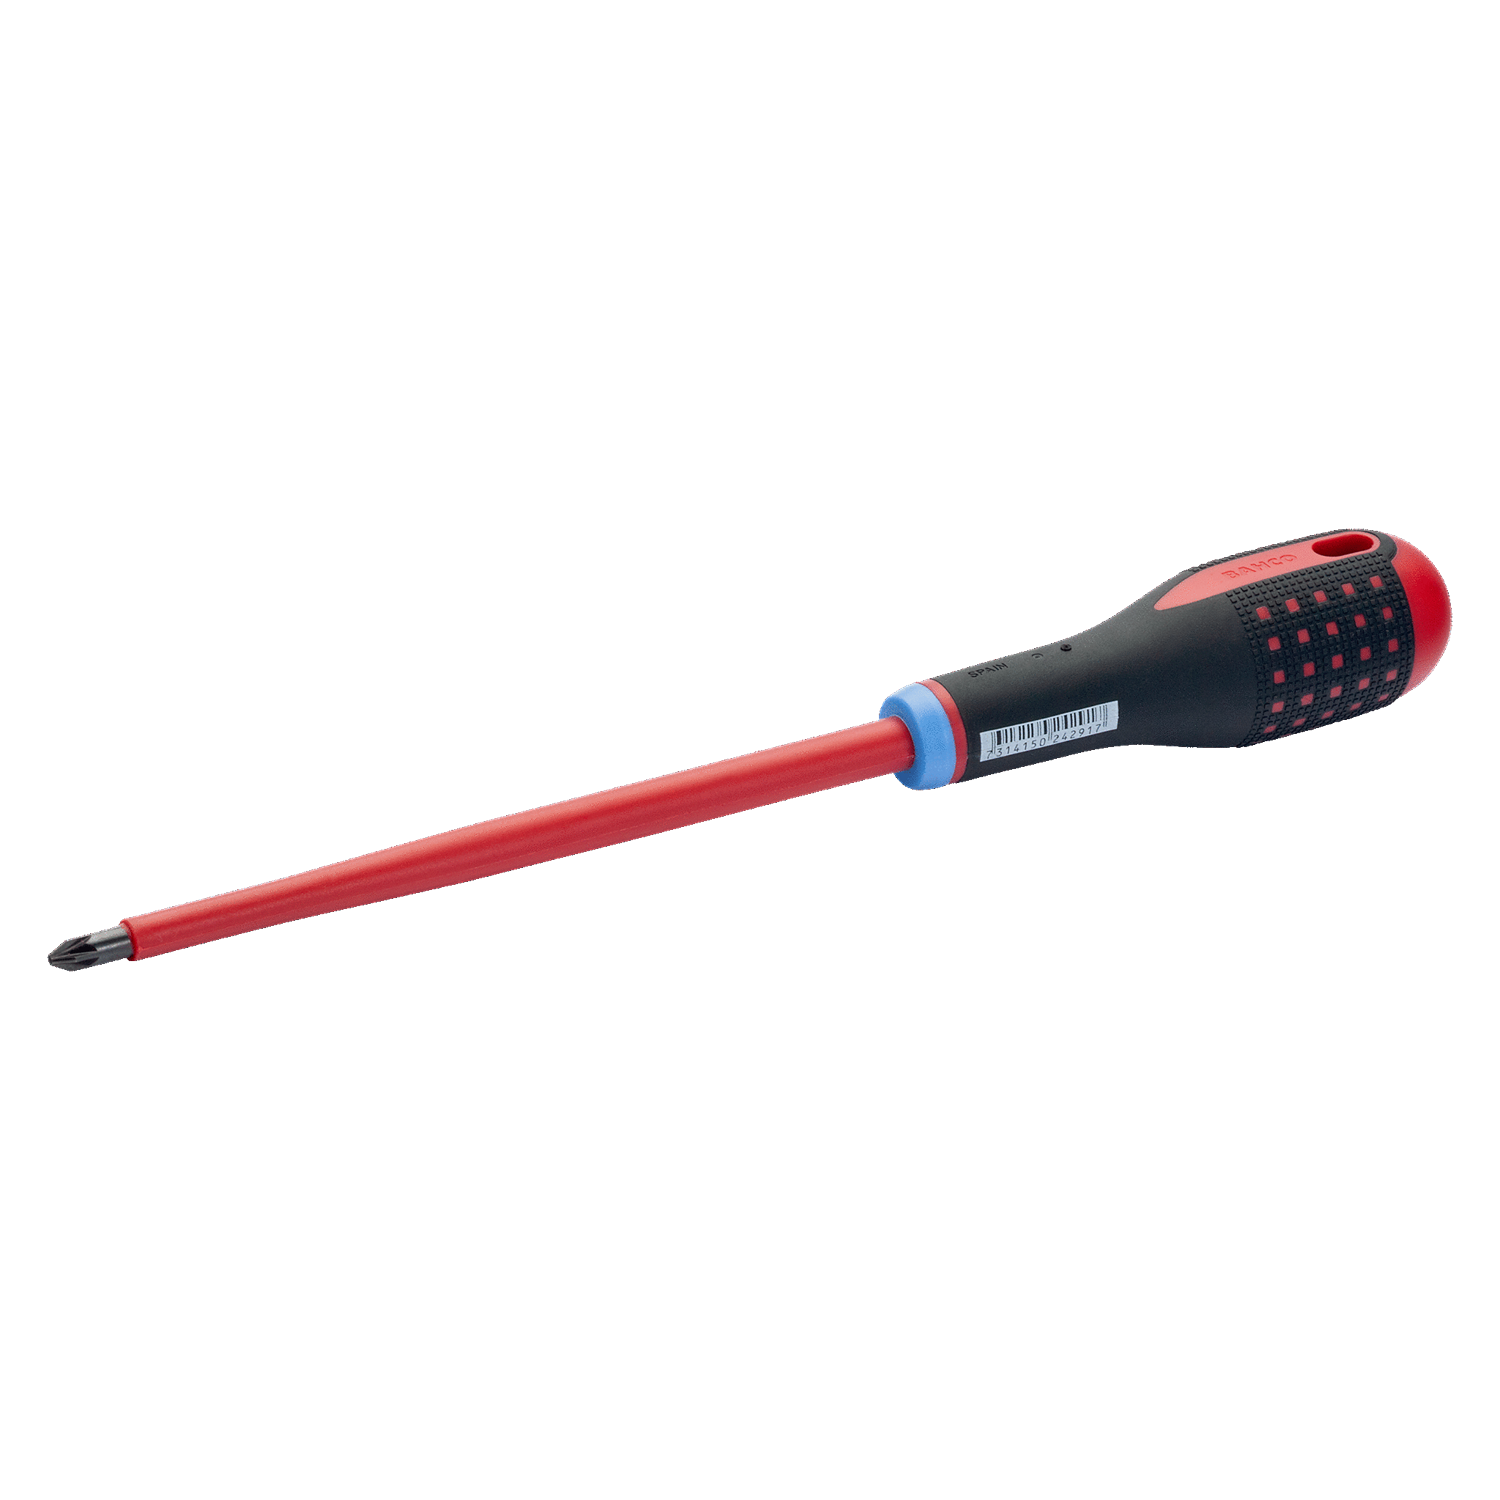 BAHCO BE-8800S - BE-8840S ERGO VDE Insulated Pozidriv Screwdriver - Premium Pozidriv Screwdriver from BAHCO - Shop now at Yew Aik.